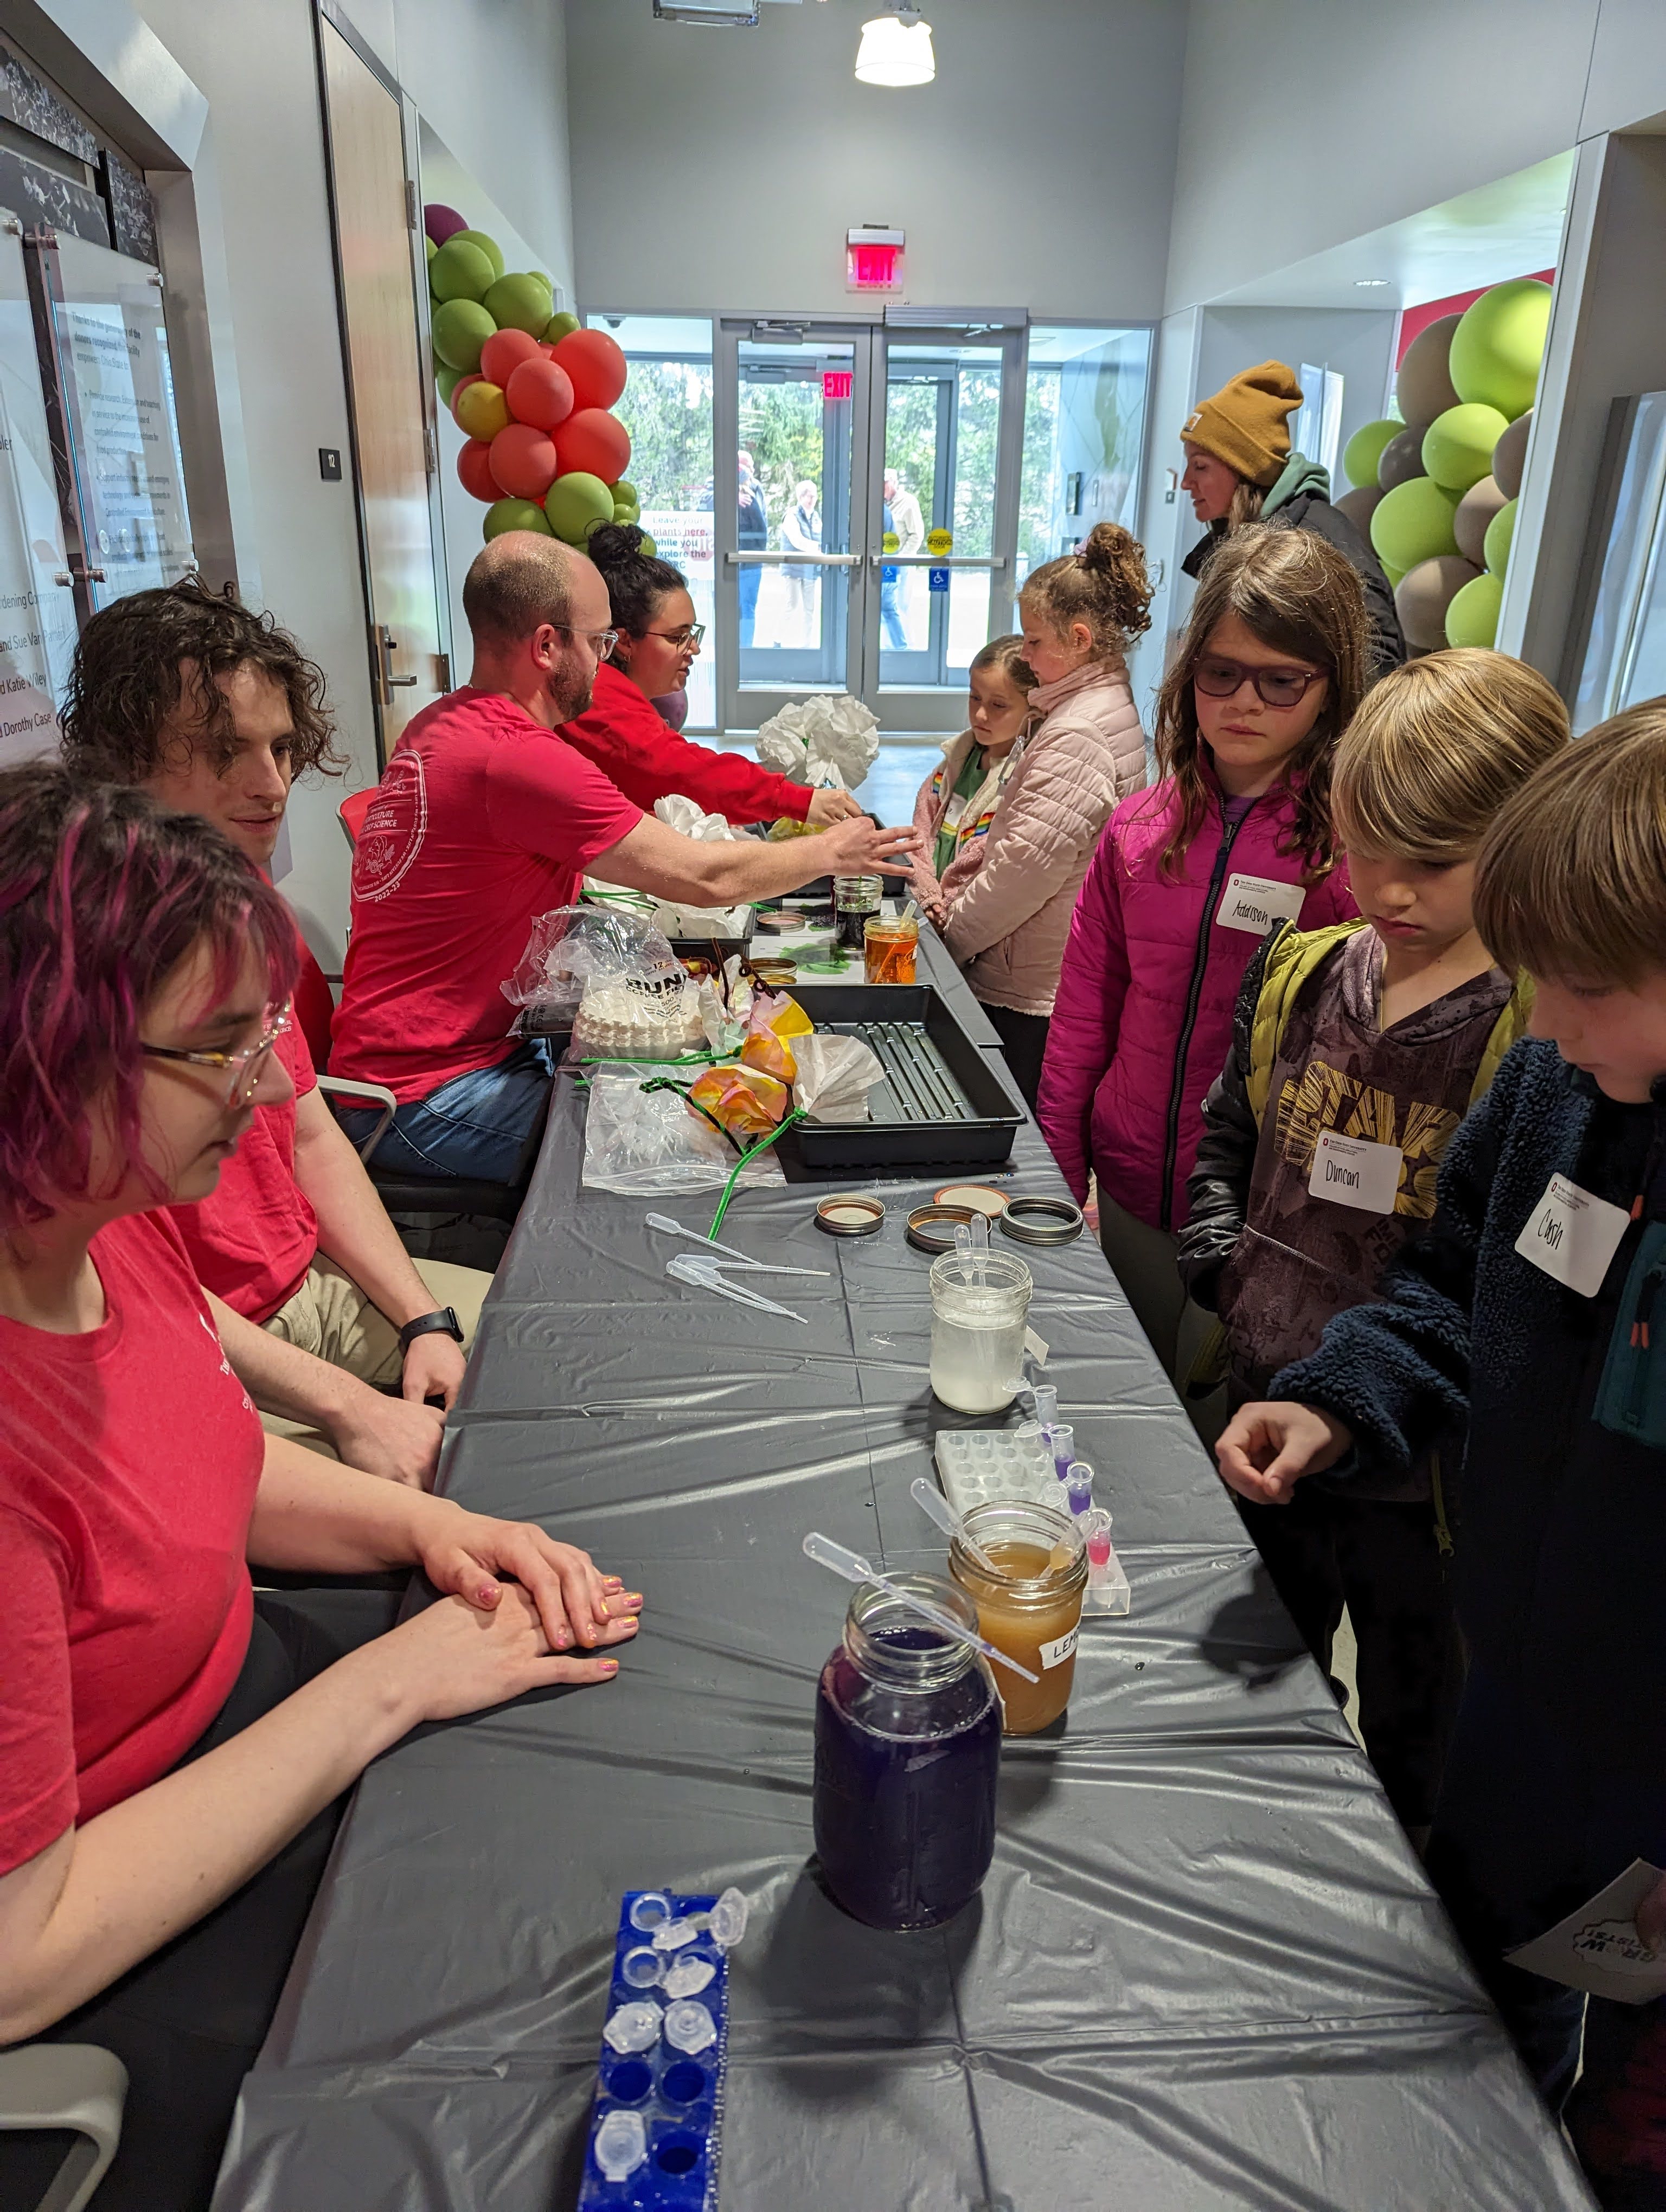 Lydia, Aaron, Matt, and Jess volunteer at We Grow Scientists 2023, with CFAES and COSI. Lydia and Aaron were teaching kids about pH using cabbage juice, lemon juice, and baking soda, and Matt and Jess were painting with natural plant pigments (from turmeric, spinach, and blackberries) on coffee filter flowers and butterflies.